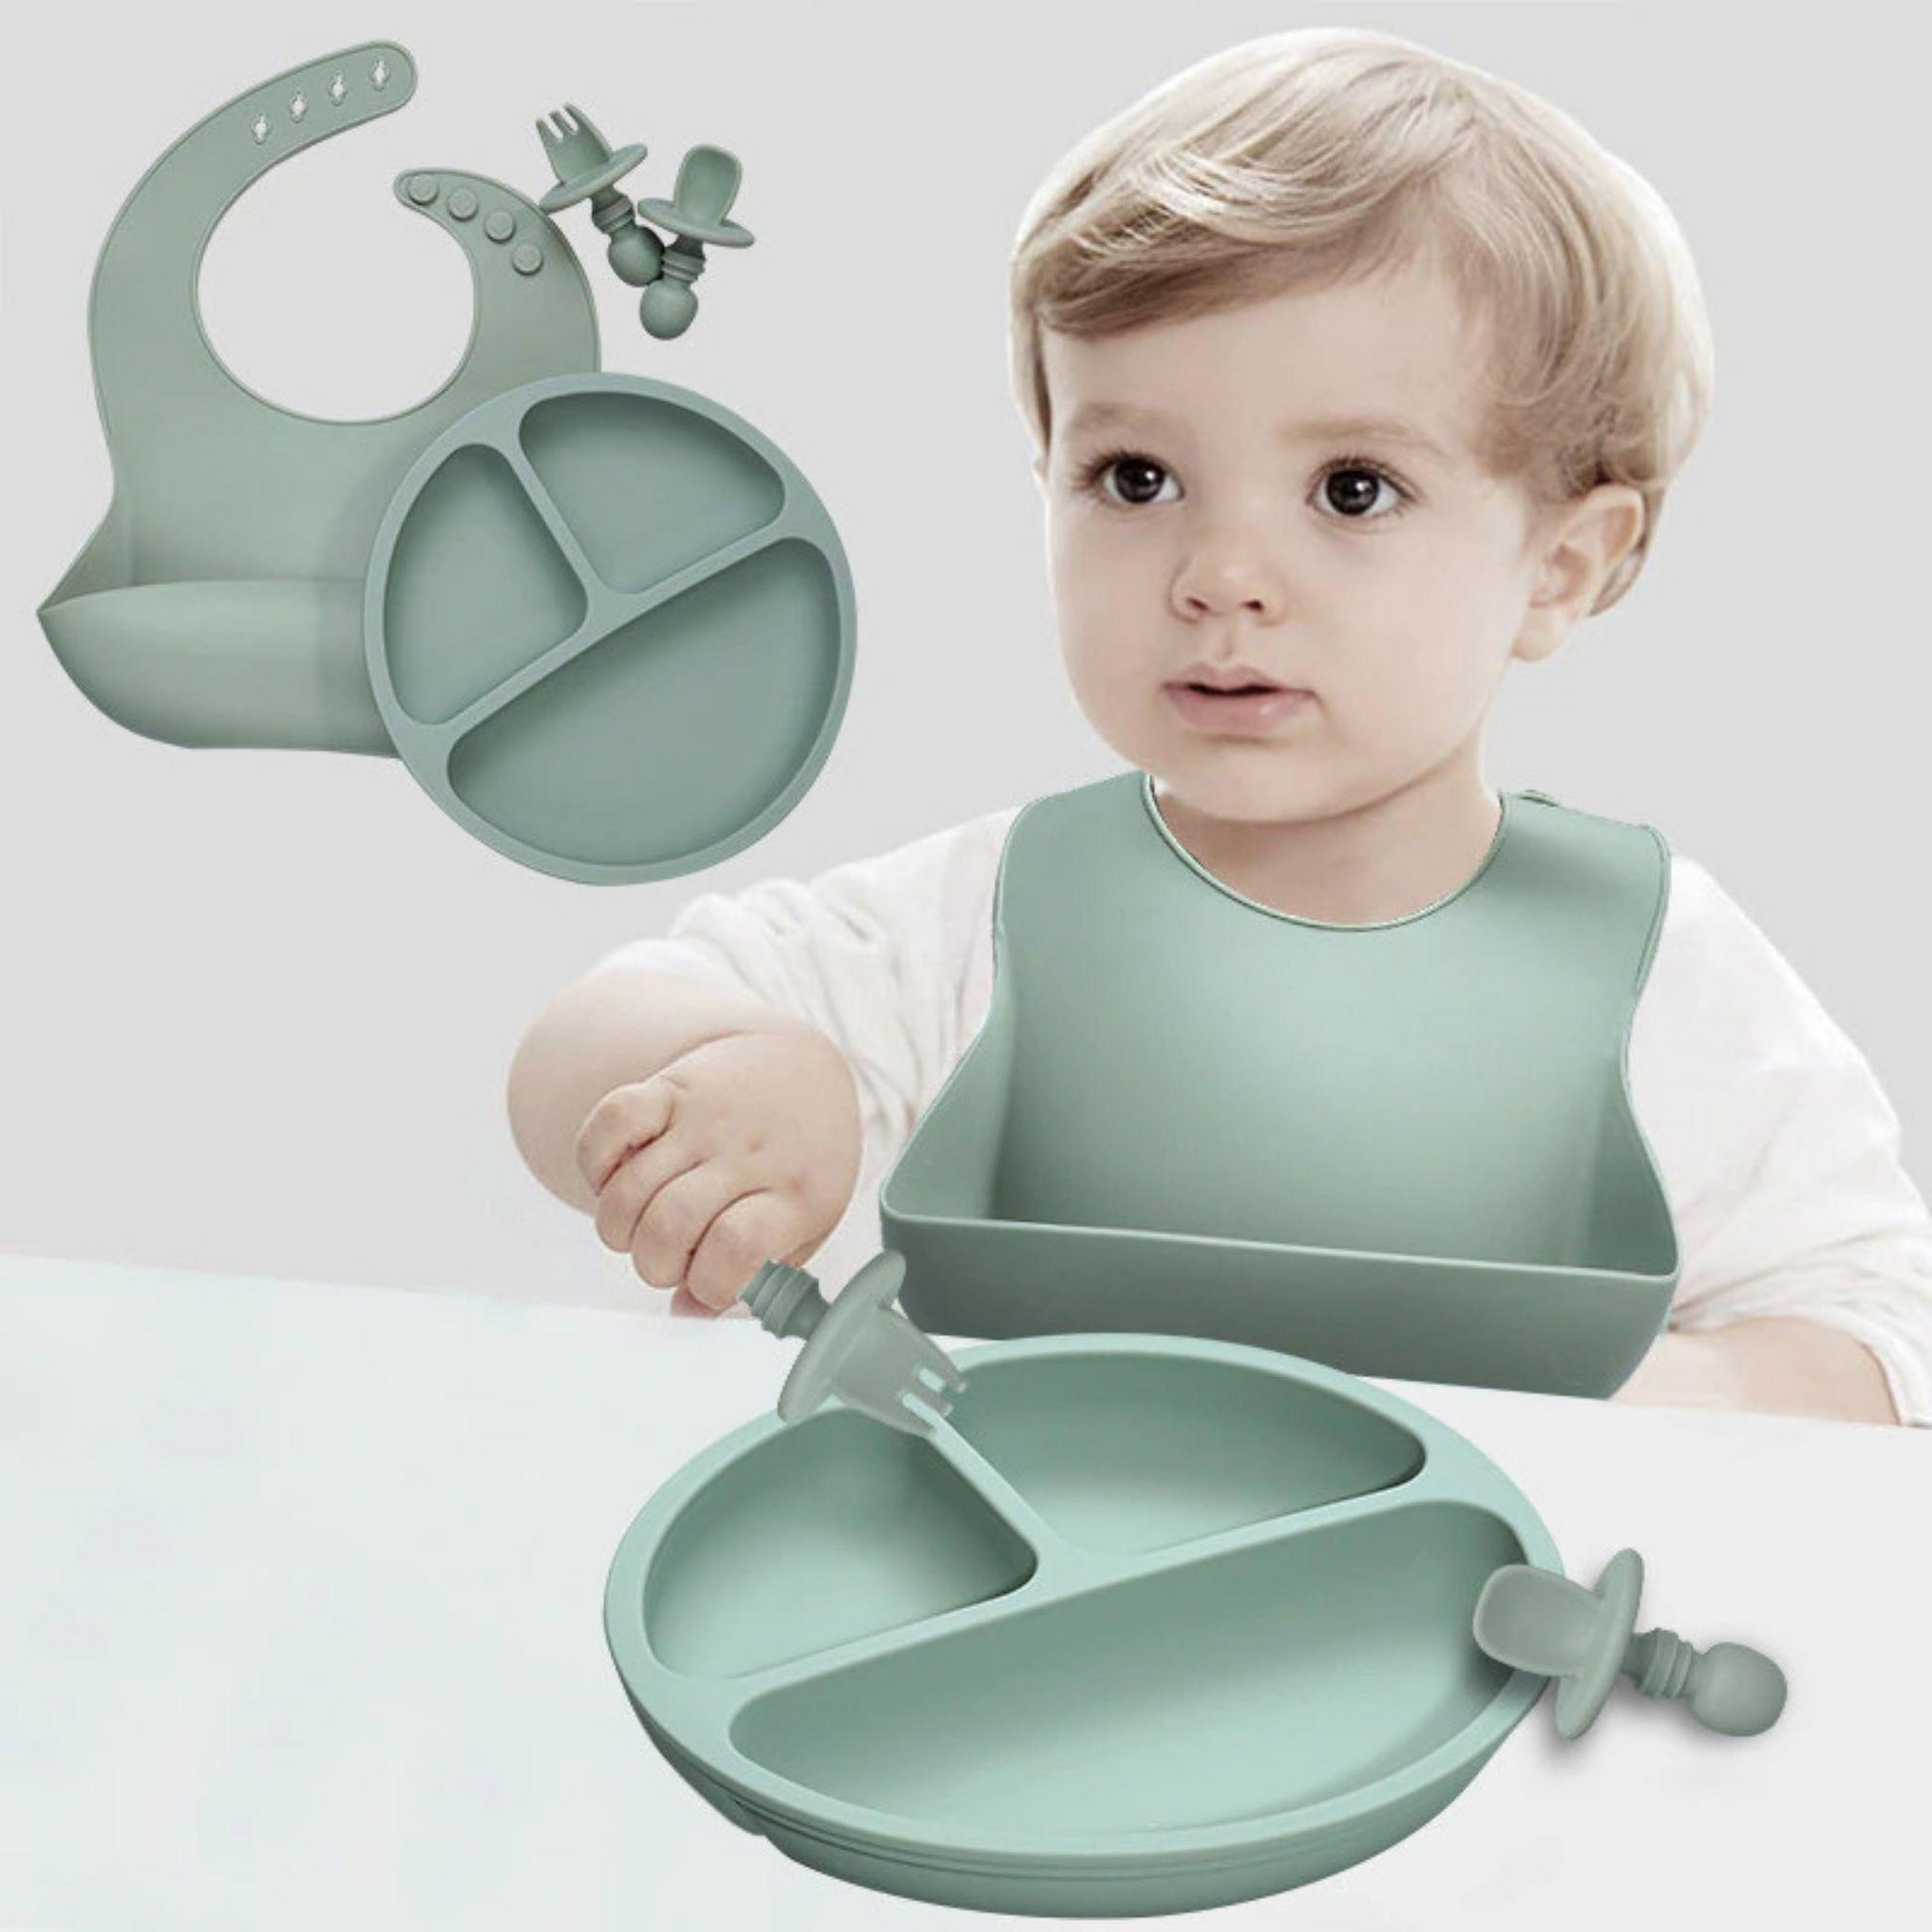 Silicone Baby Table Dining Set - Bib, Plate and Utensils-Baby tableware and Dining-Hunny Bubba Kids